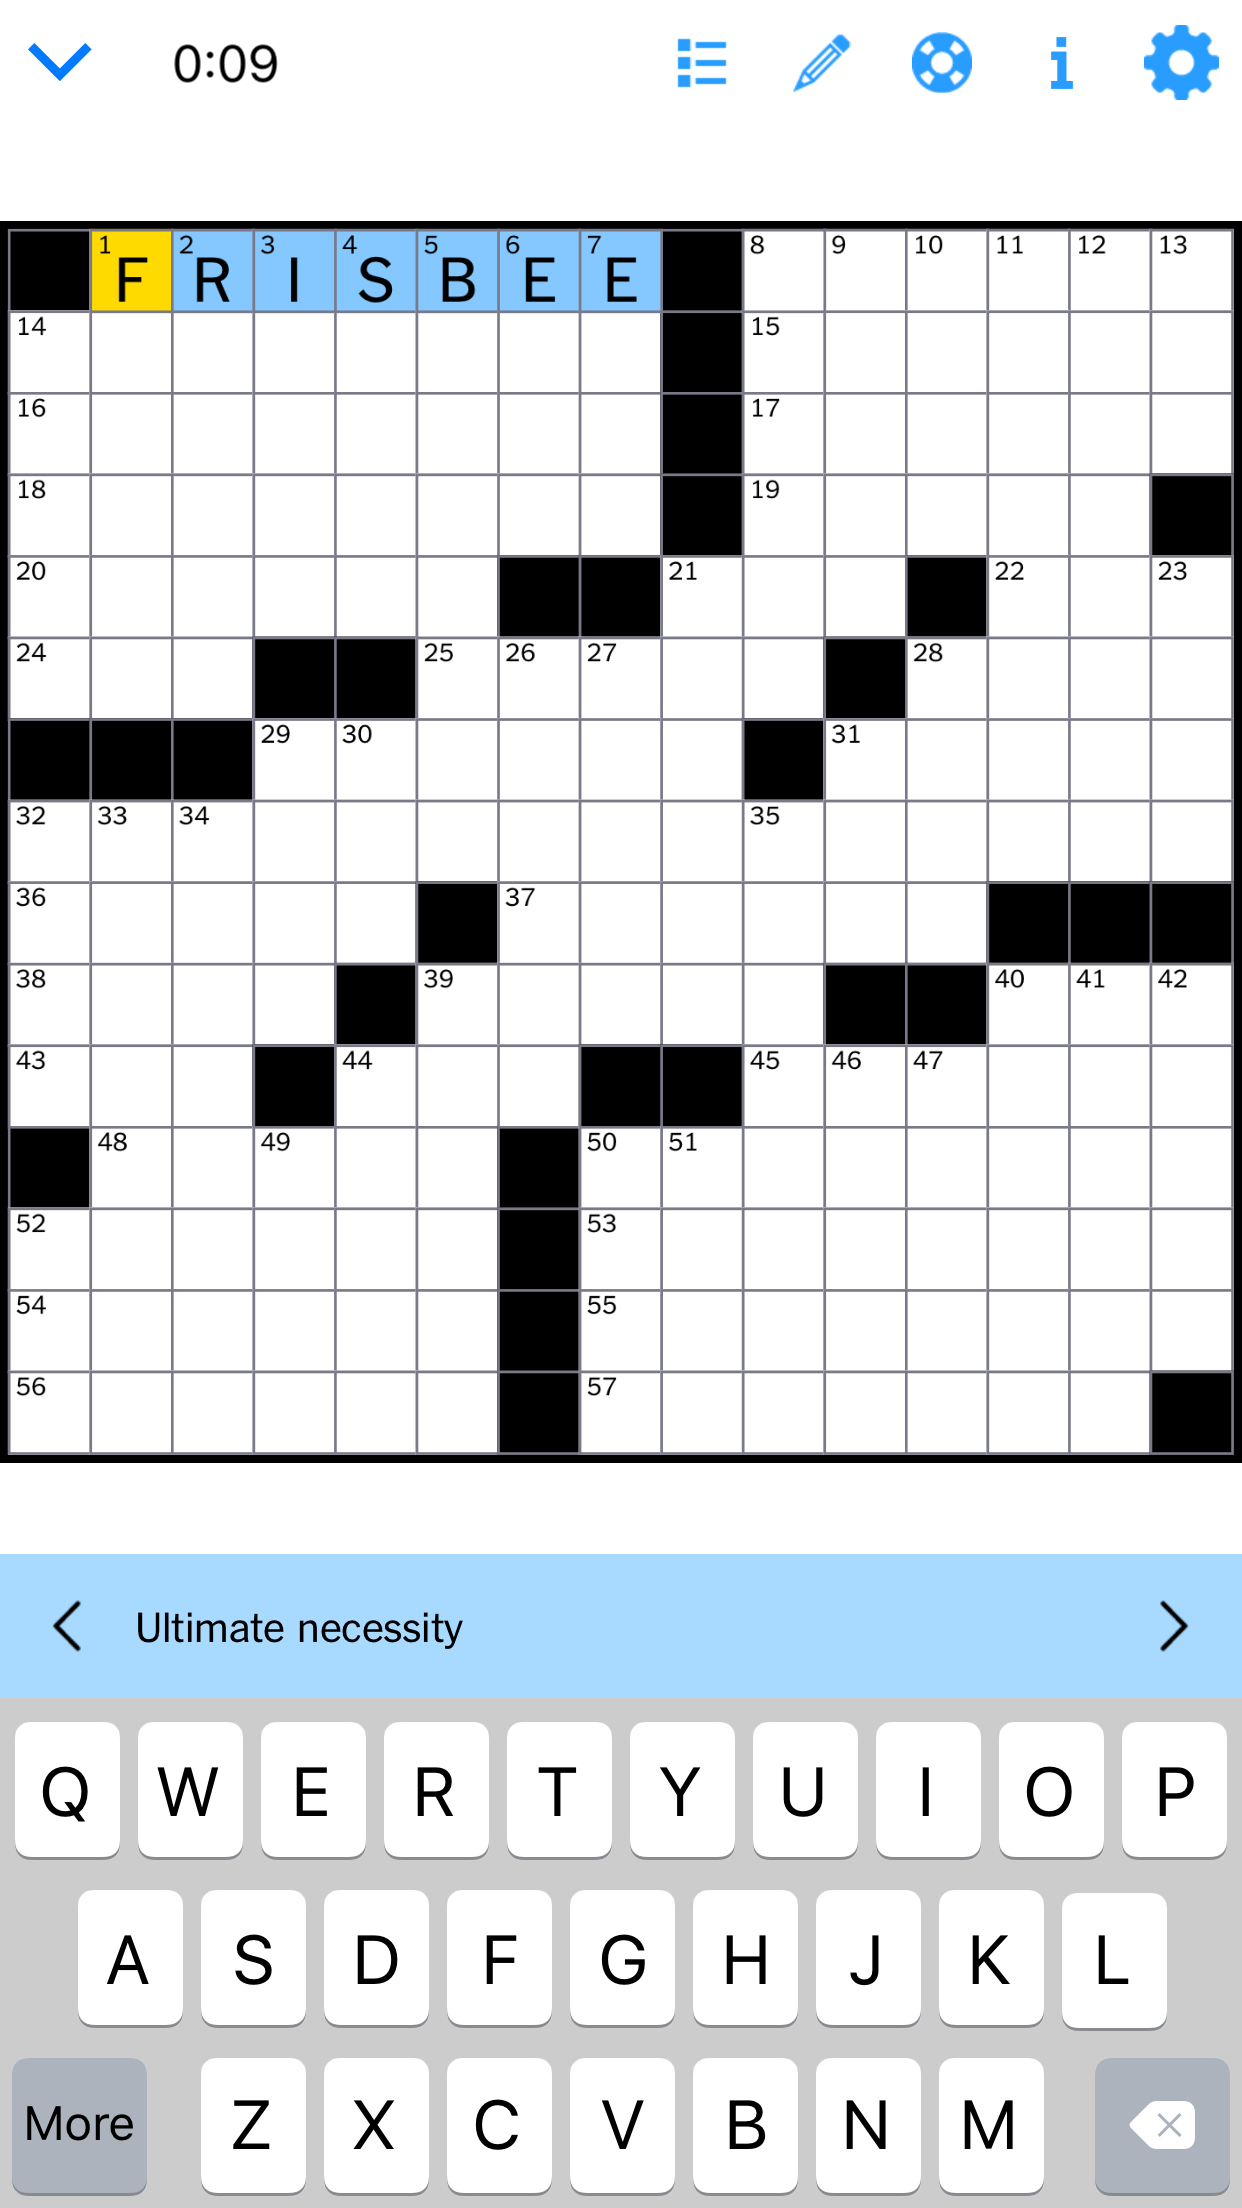 Ny Times Crossword Features Ultimate In 1-Across With Great Clue - Free Printable Crossword Puzzles Livewire